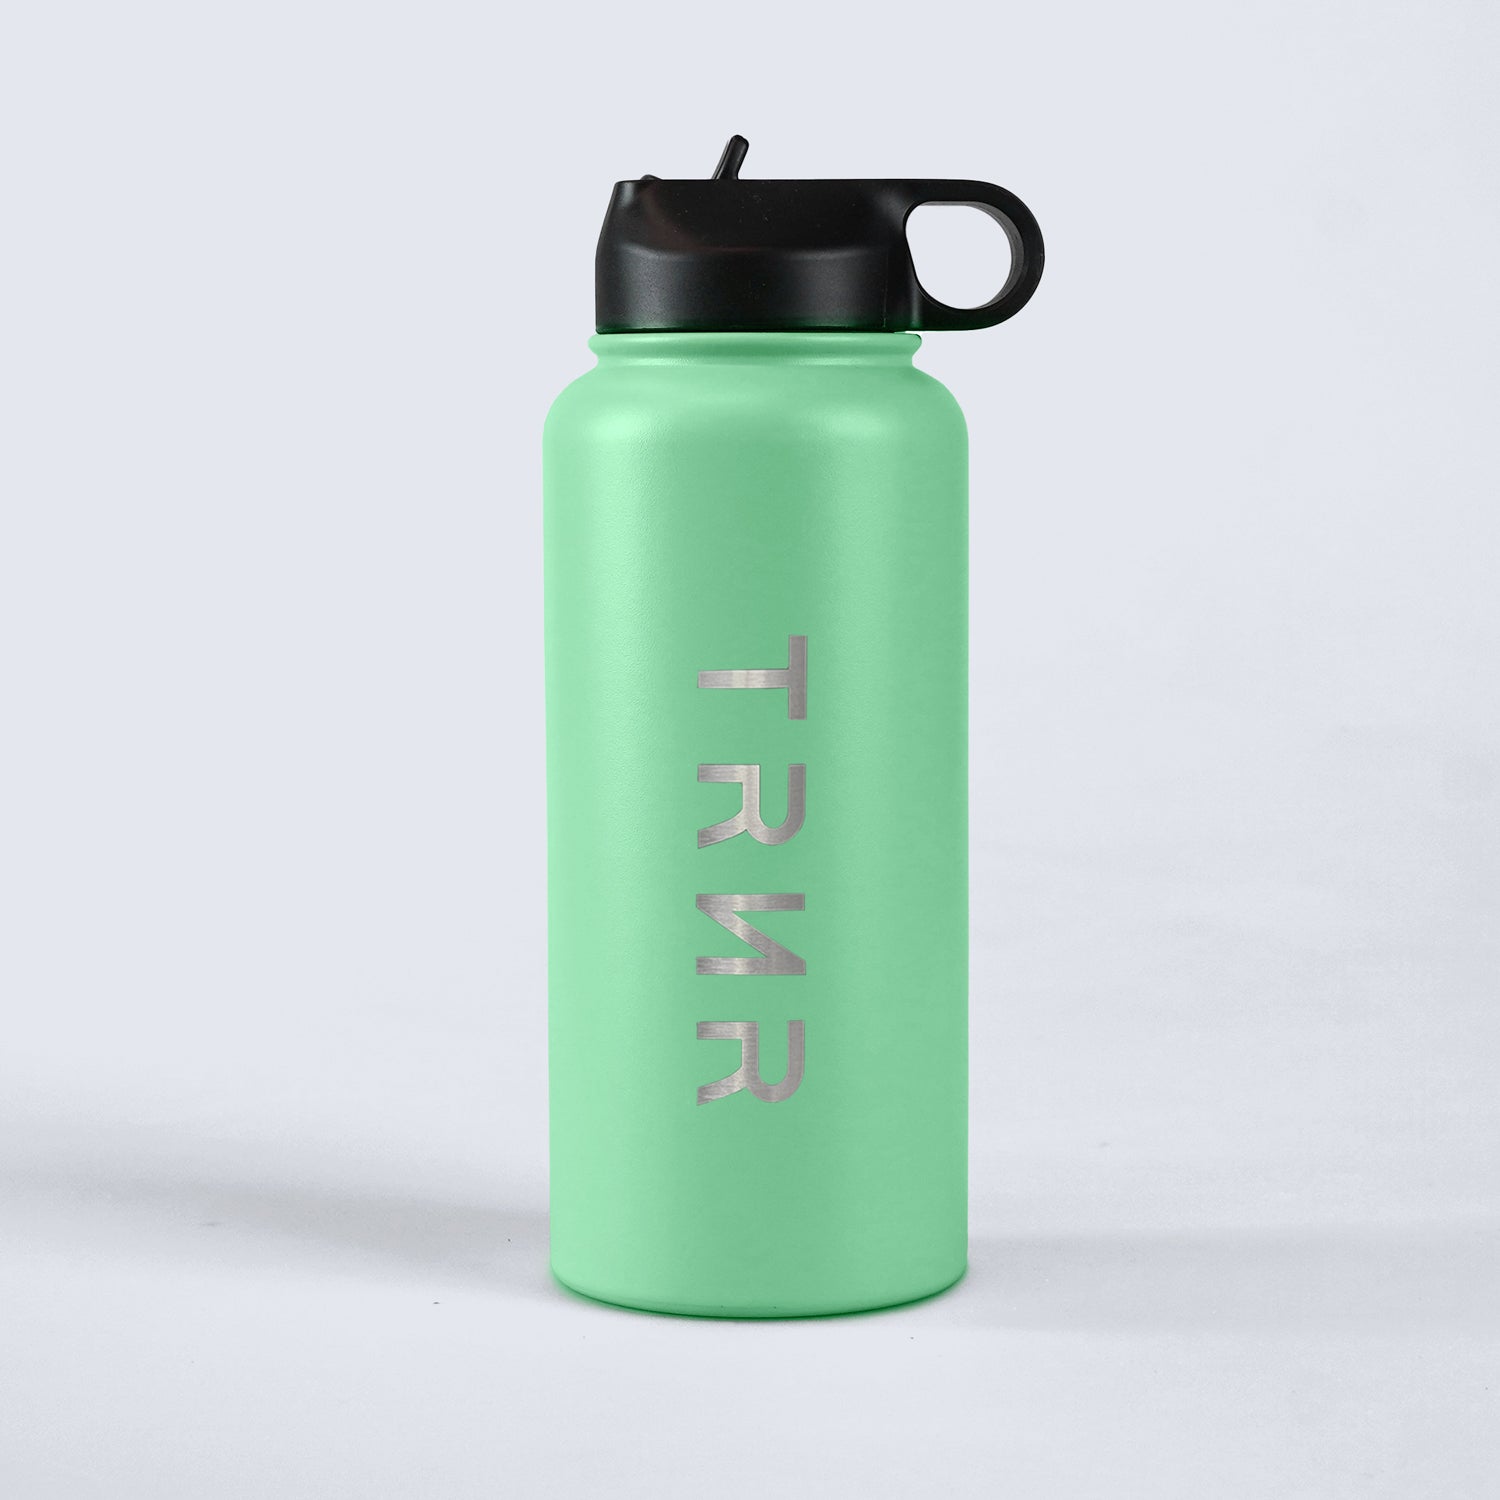 TRNR Sports Bottle (Mint) in 946 ml capacity | Product Overview Featuring TRNR Logo and Flip Spout with Handle